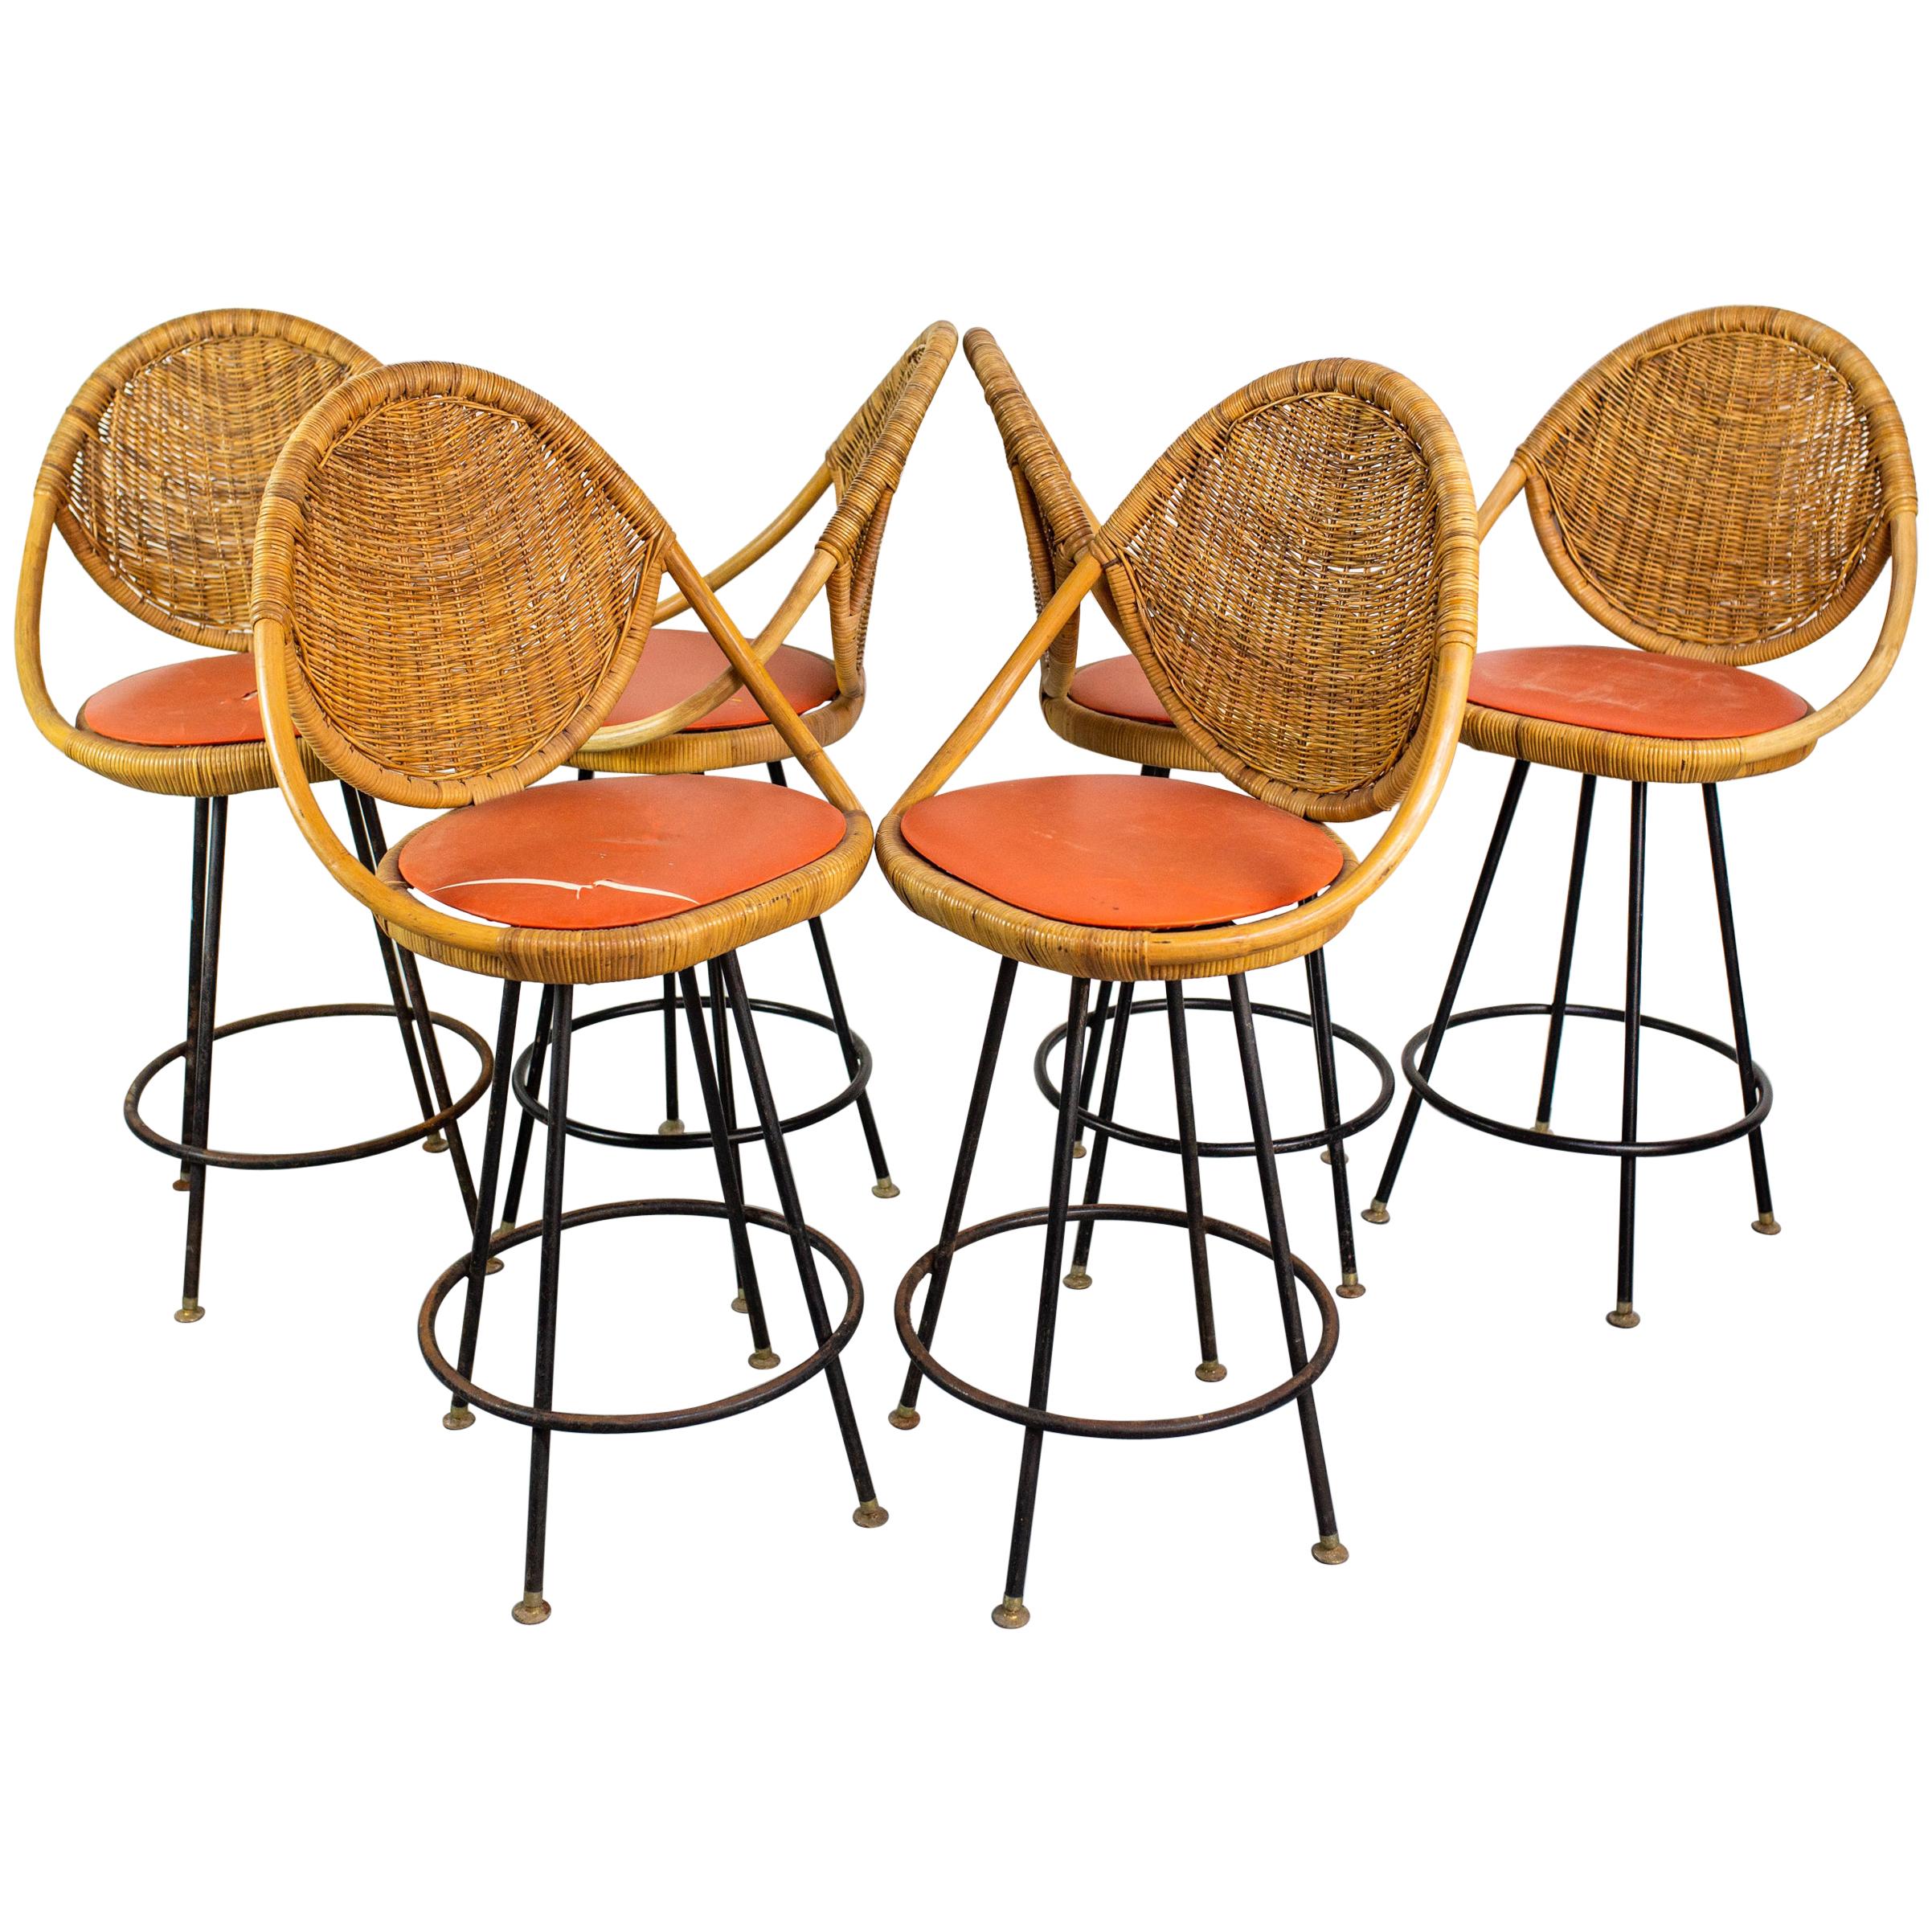 Set of 5 Mid-Century Modern Bar Stools by Danny Ho Fong, US, 1960s